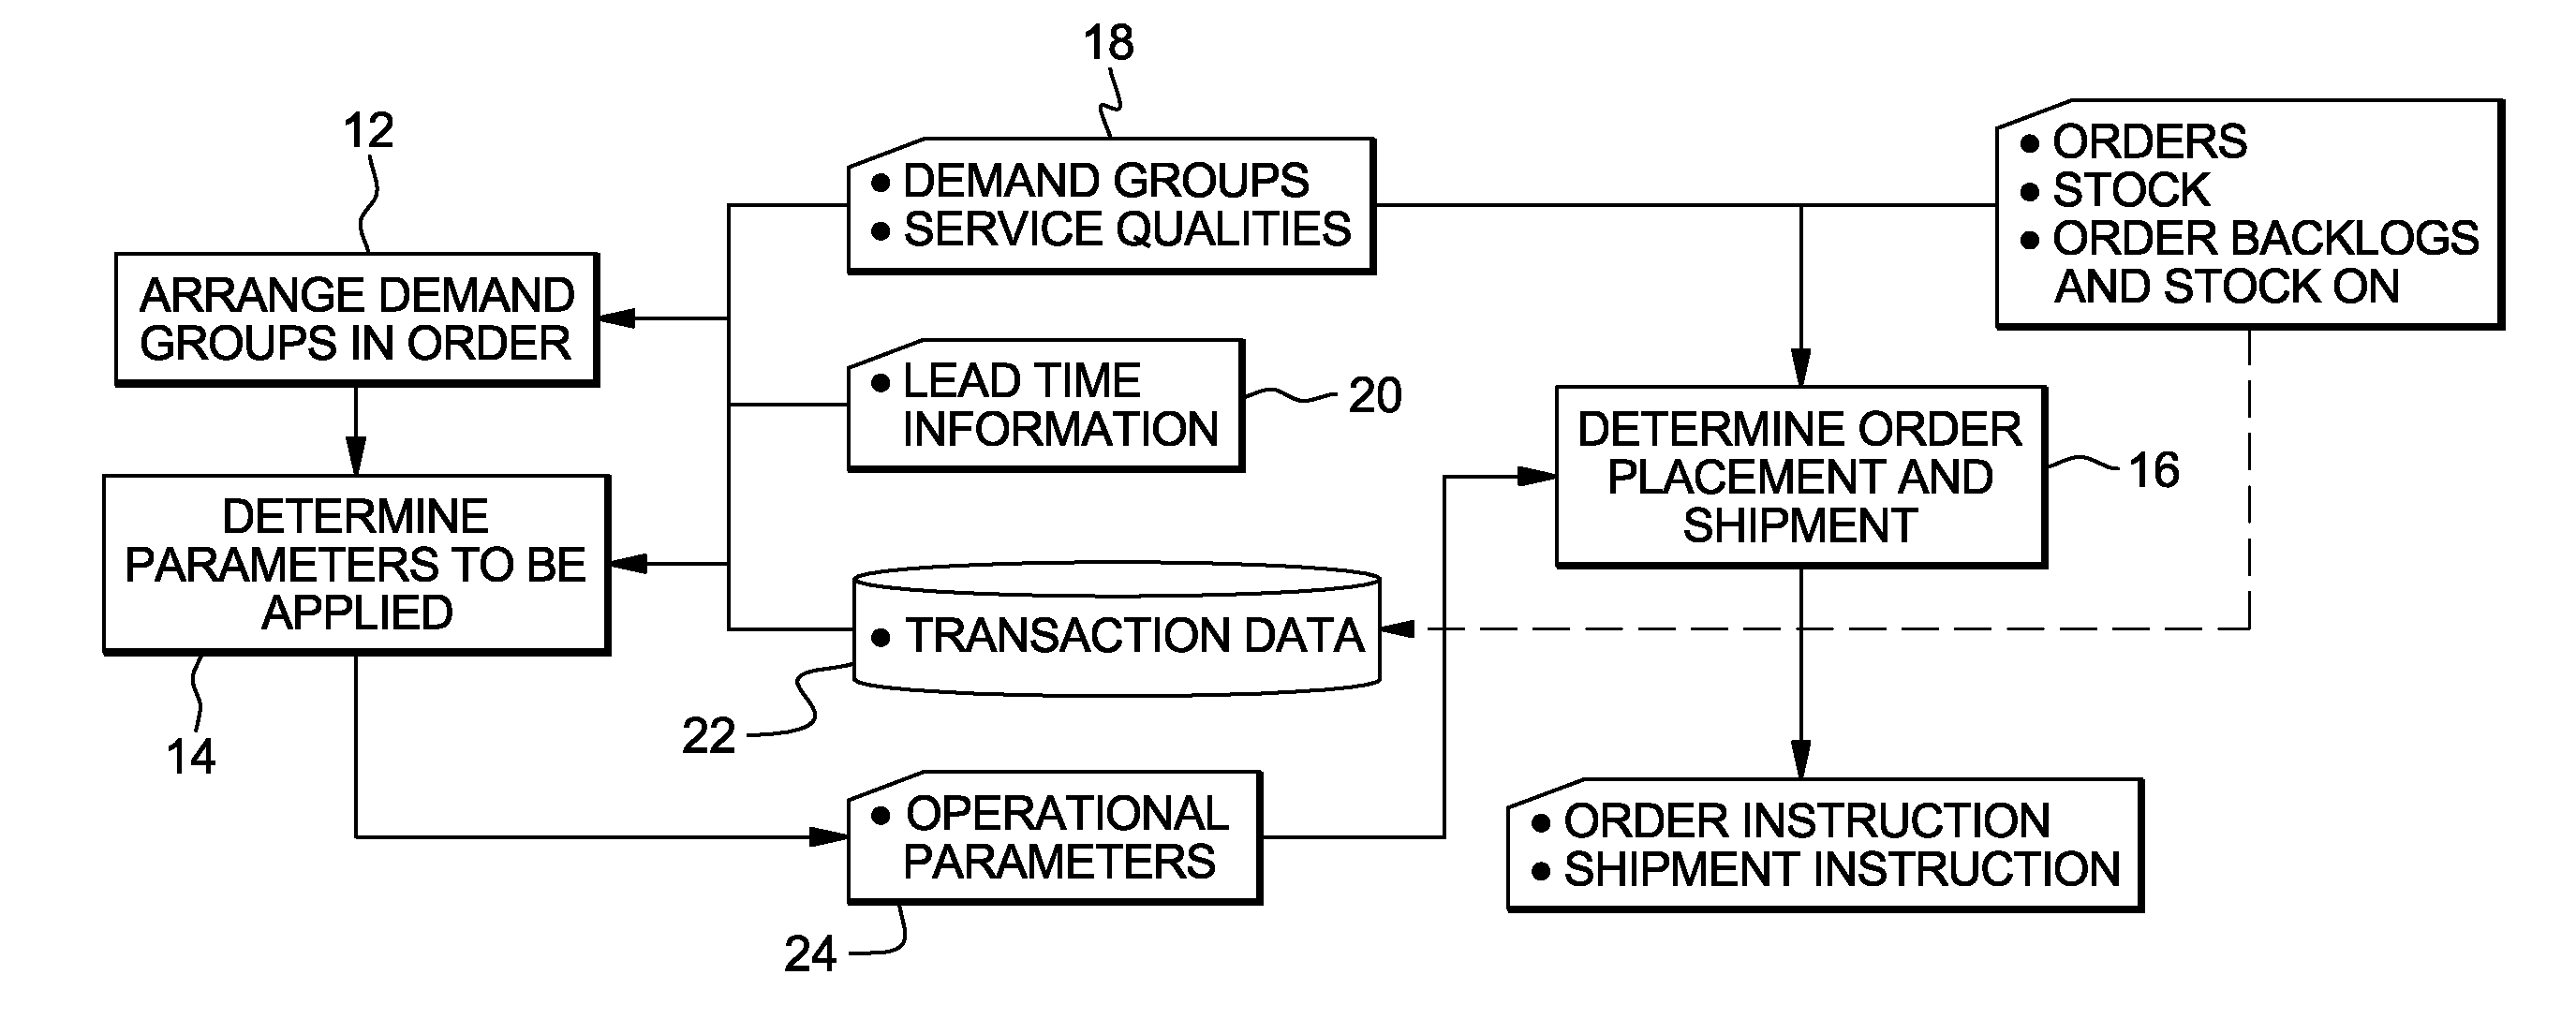 Efficient inventory management for providing distinct service qualities for multiple demand groups